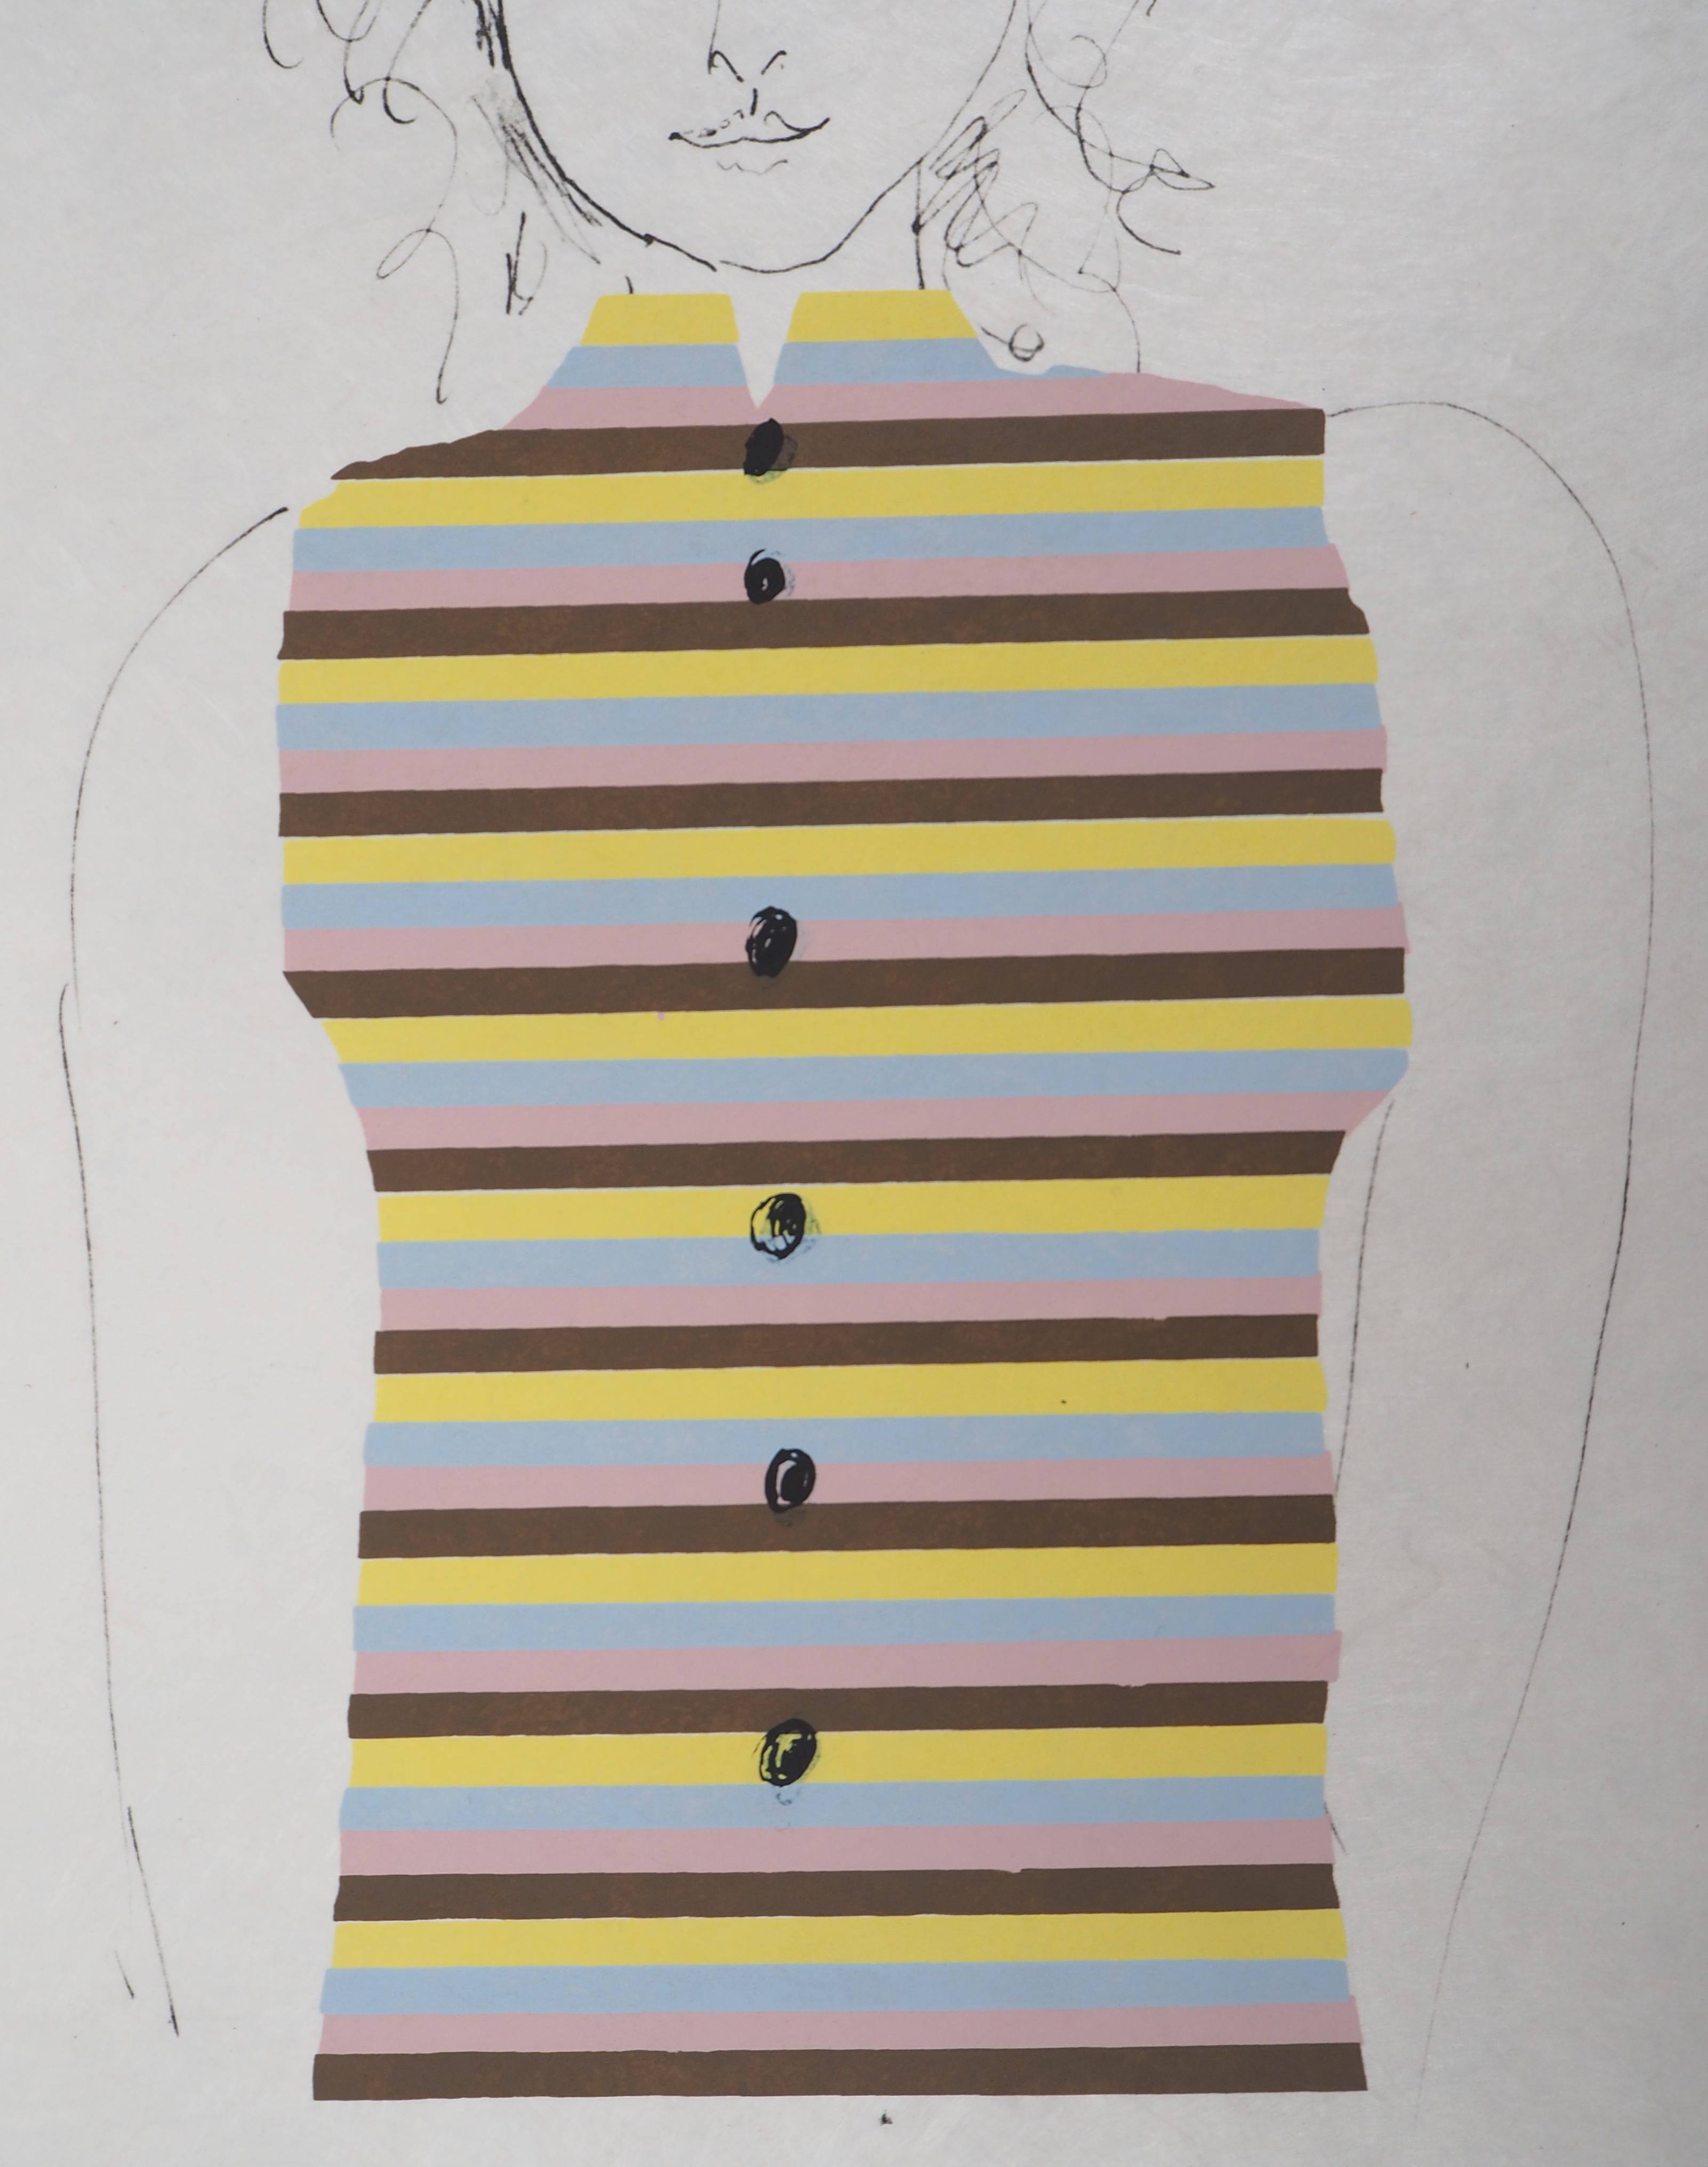 Young Girl With Stripes Sweater - Lithograph on Japan paper - Ltd to 100 proofs - Modern Print by (after) Pablo Picasso